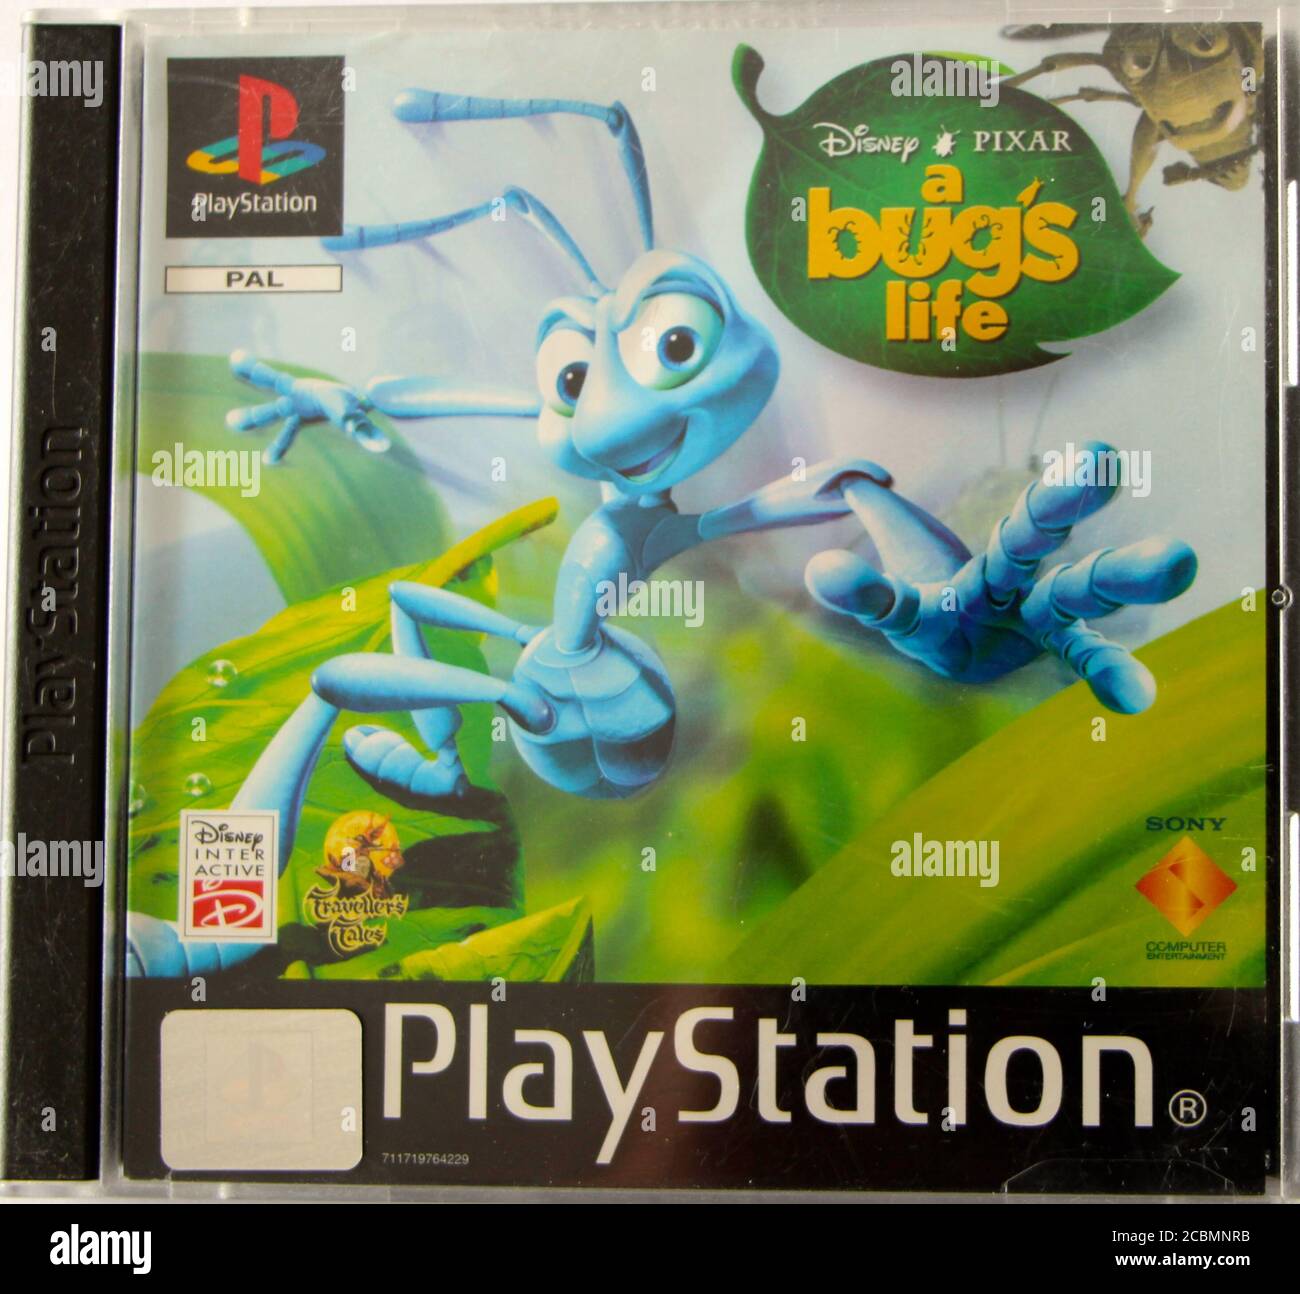 how many bugs in a box cd